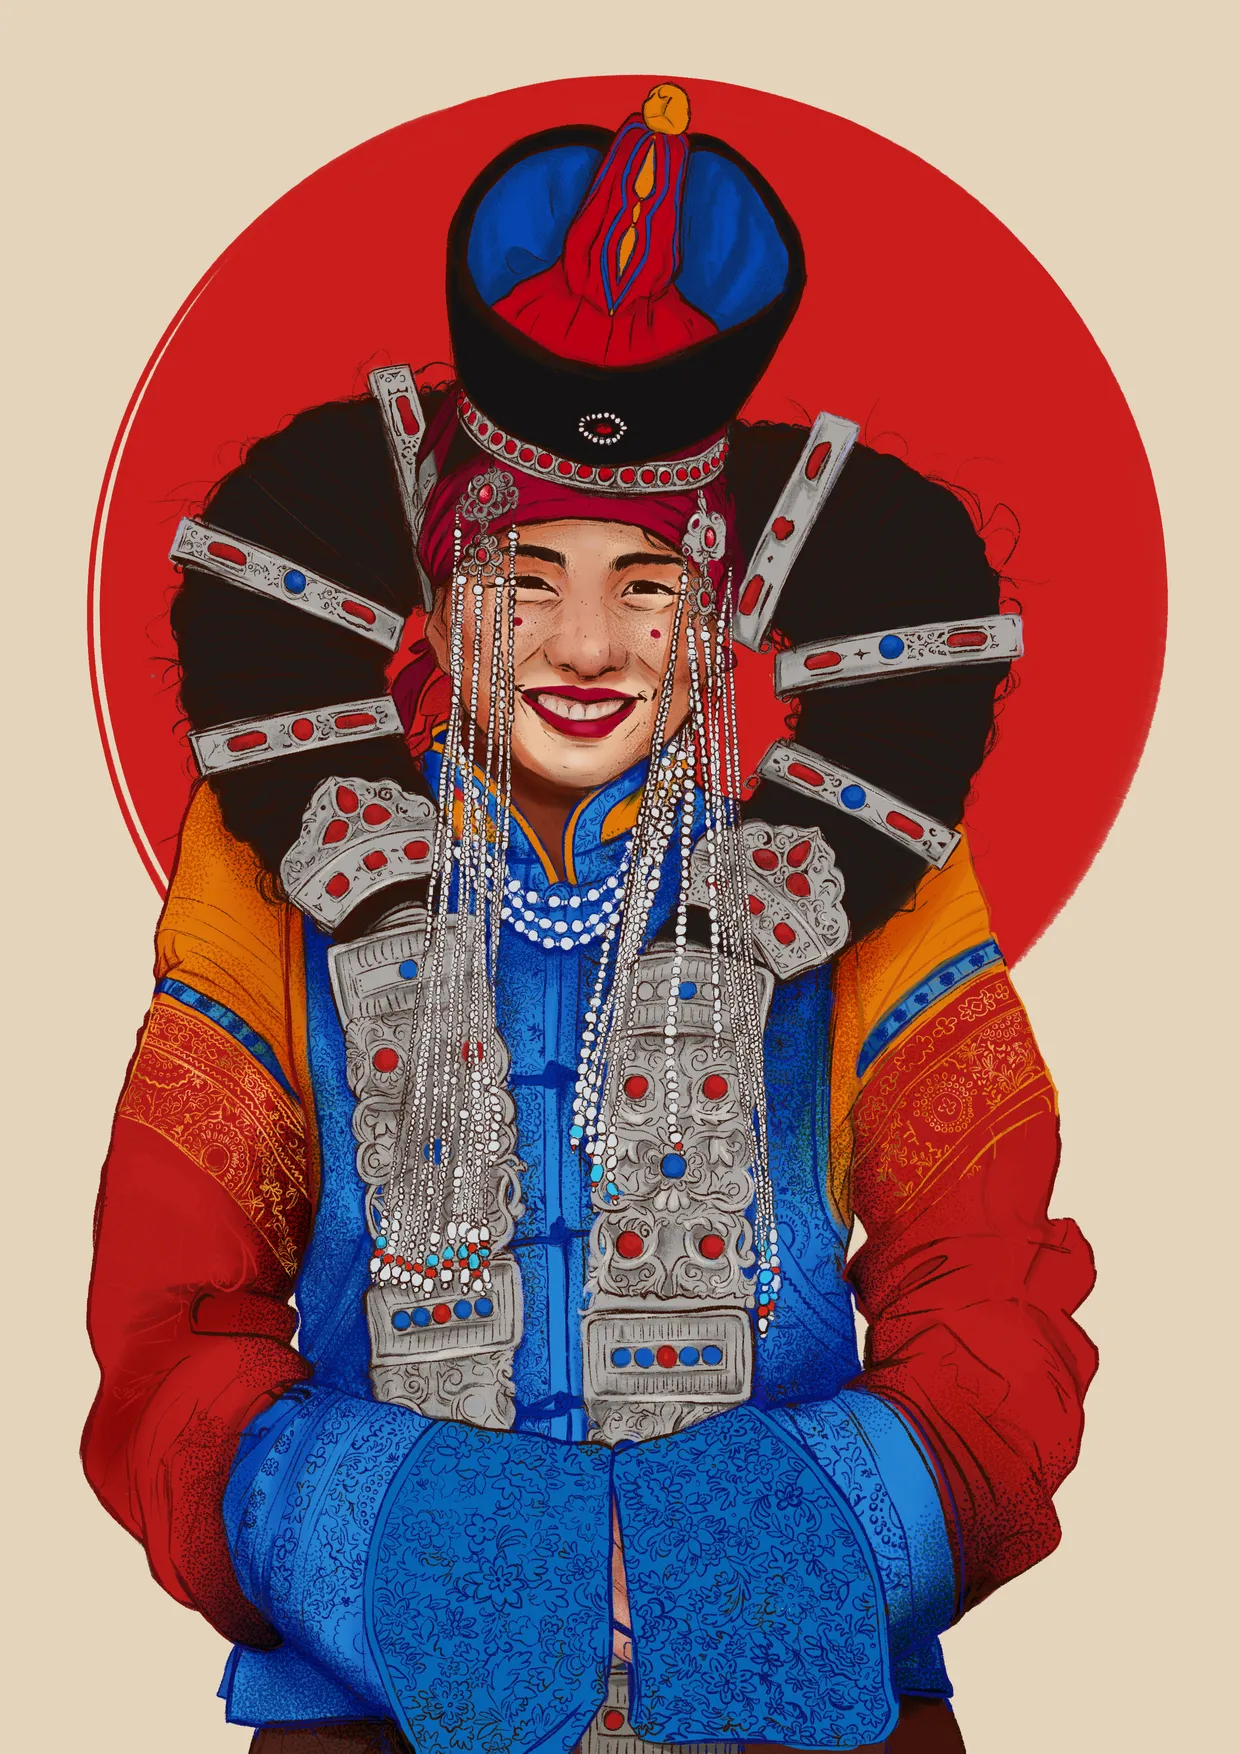 a digital portrait of a smiling woman wearing a traditional Mongolian costume